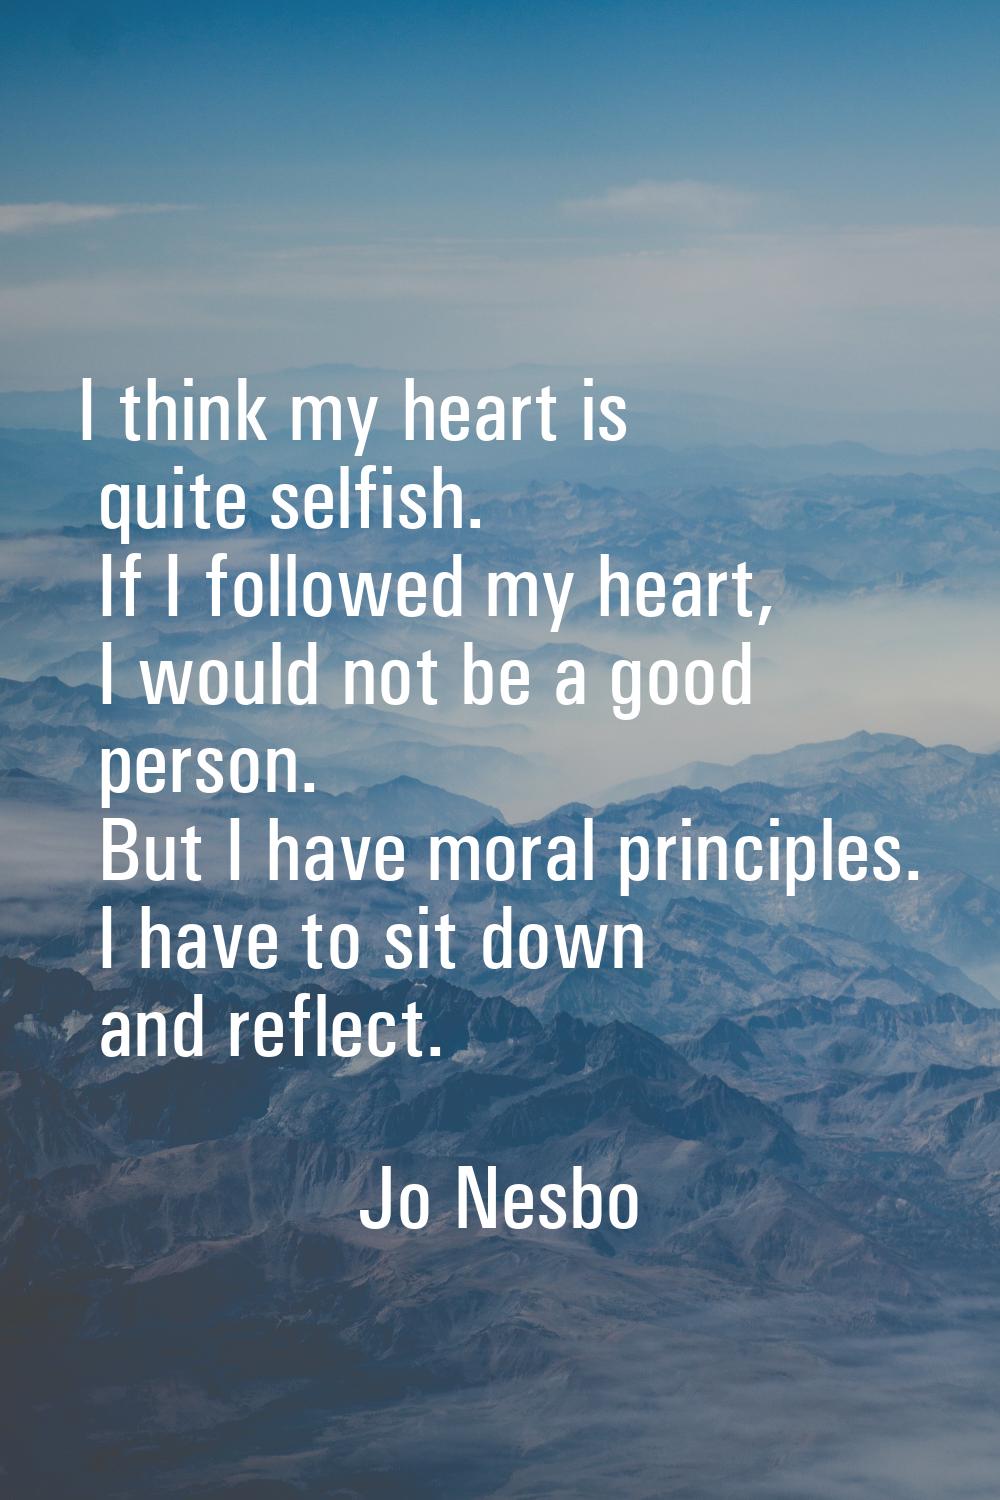 I think my heart is quite selfish. If I followed my heart, I would not be a good person. But I have